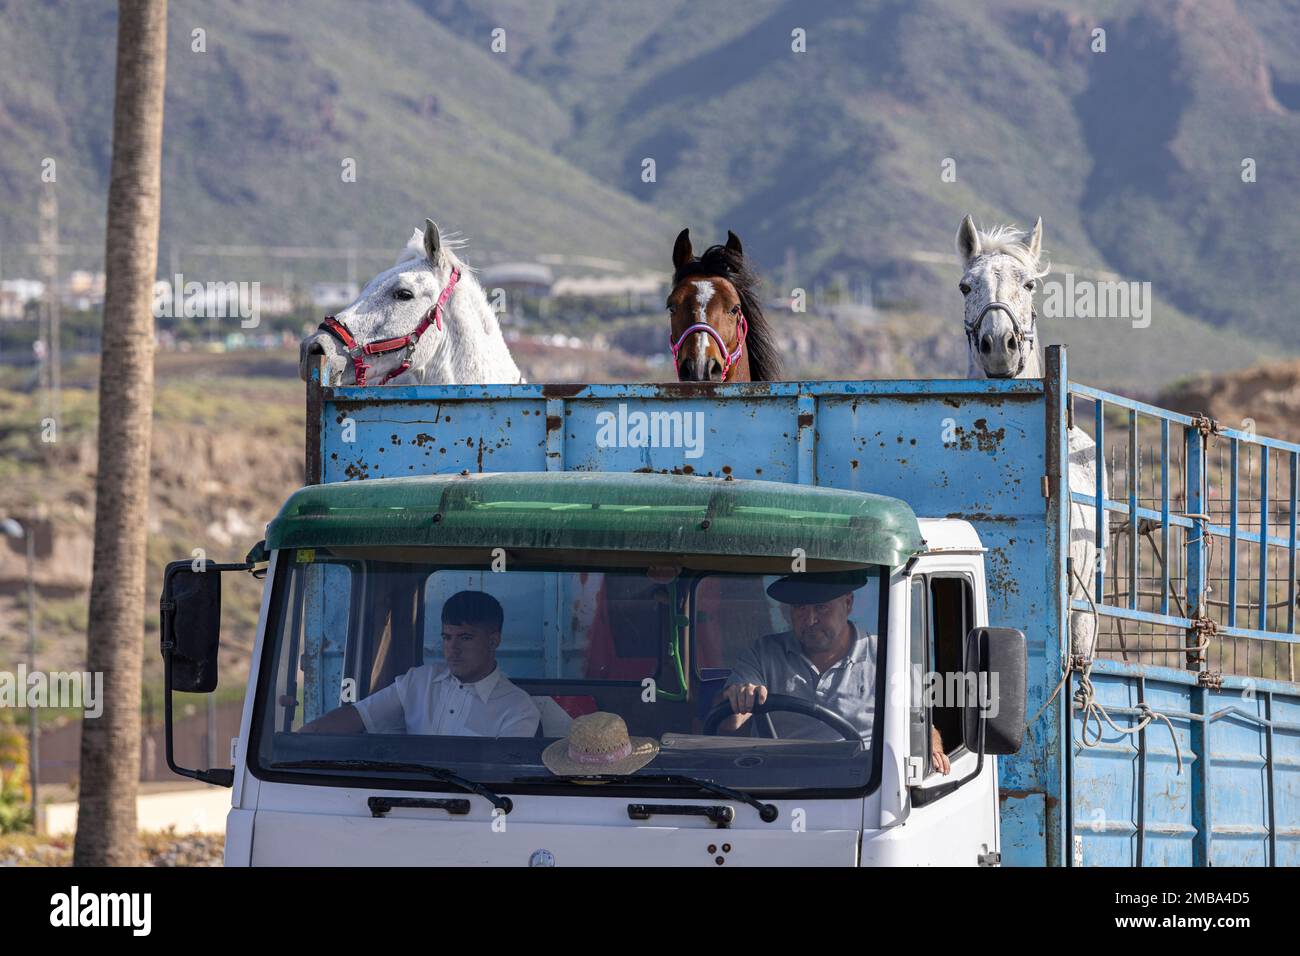 Costa Adeje, Tenerife, Canary Islands, 20 January 2023. Horses arrive in the back of a truck to take part in the fiesta of San Sebastian which returns for the first time since 2020 due to the covid pandemic restrictions. The annual fiesta in La Caleta on the Costa Adeje is enjoyed by locals and tourists who gather to see the many horses that come to bathe in the sea at the Playa Enramada beach. Credit: Phil Crean A/Alamy Live News Stock Photo